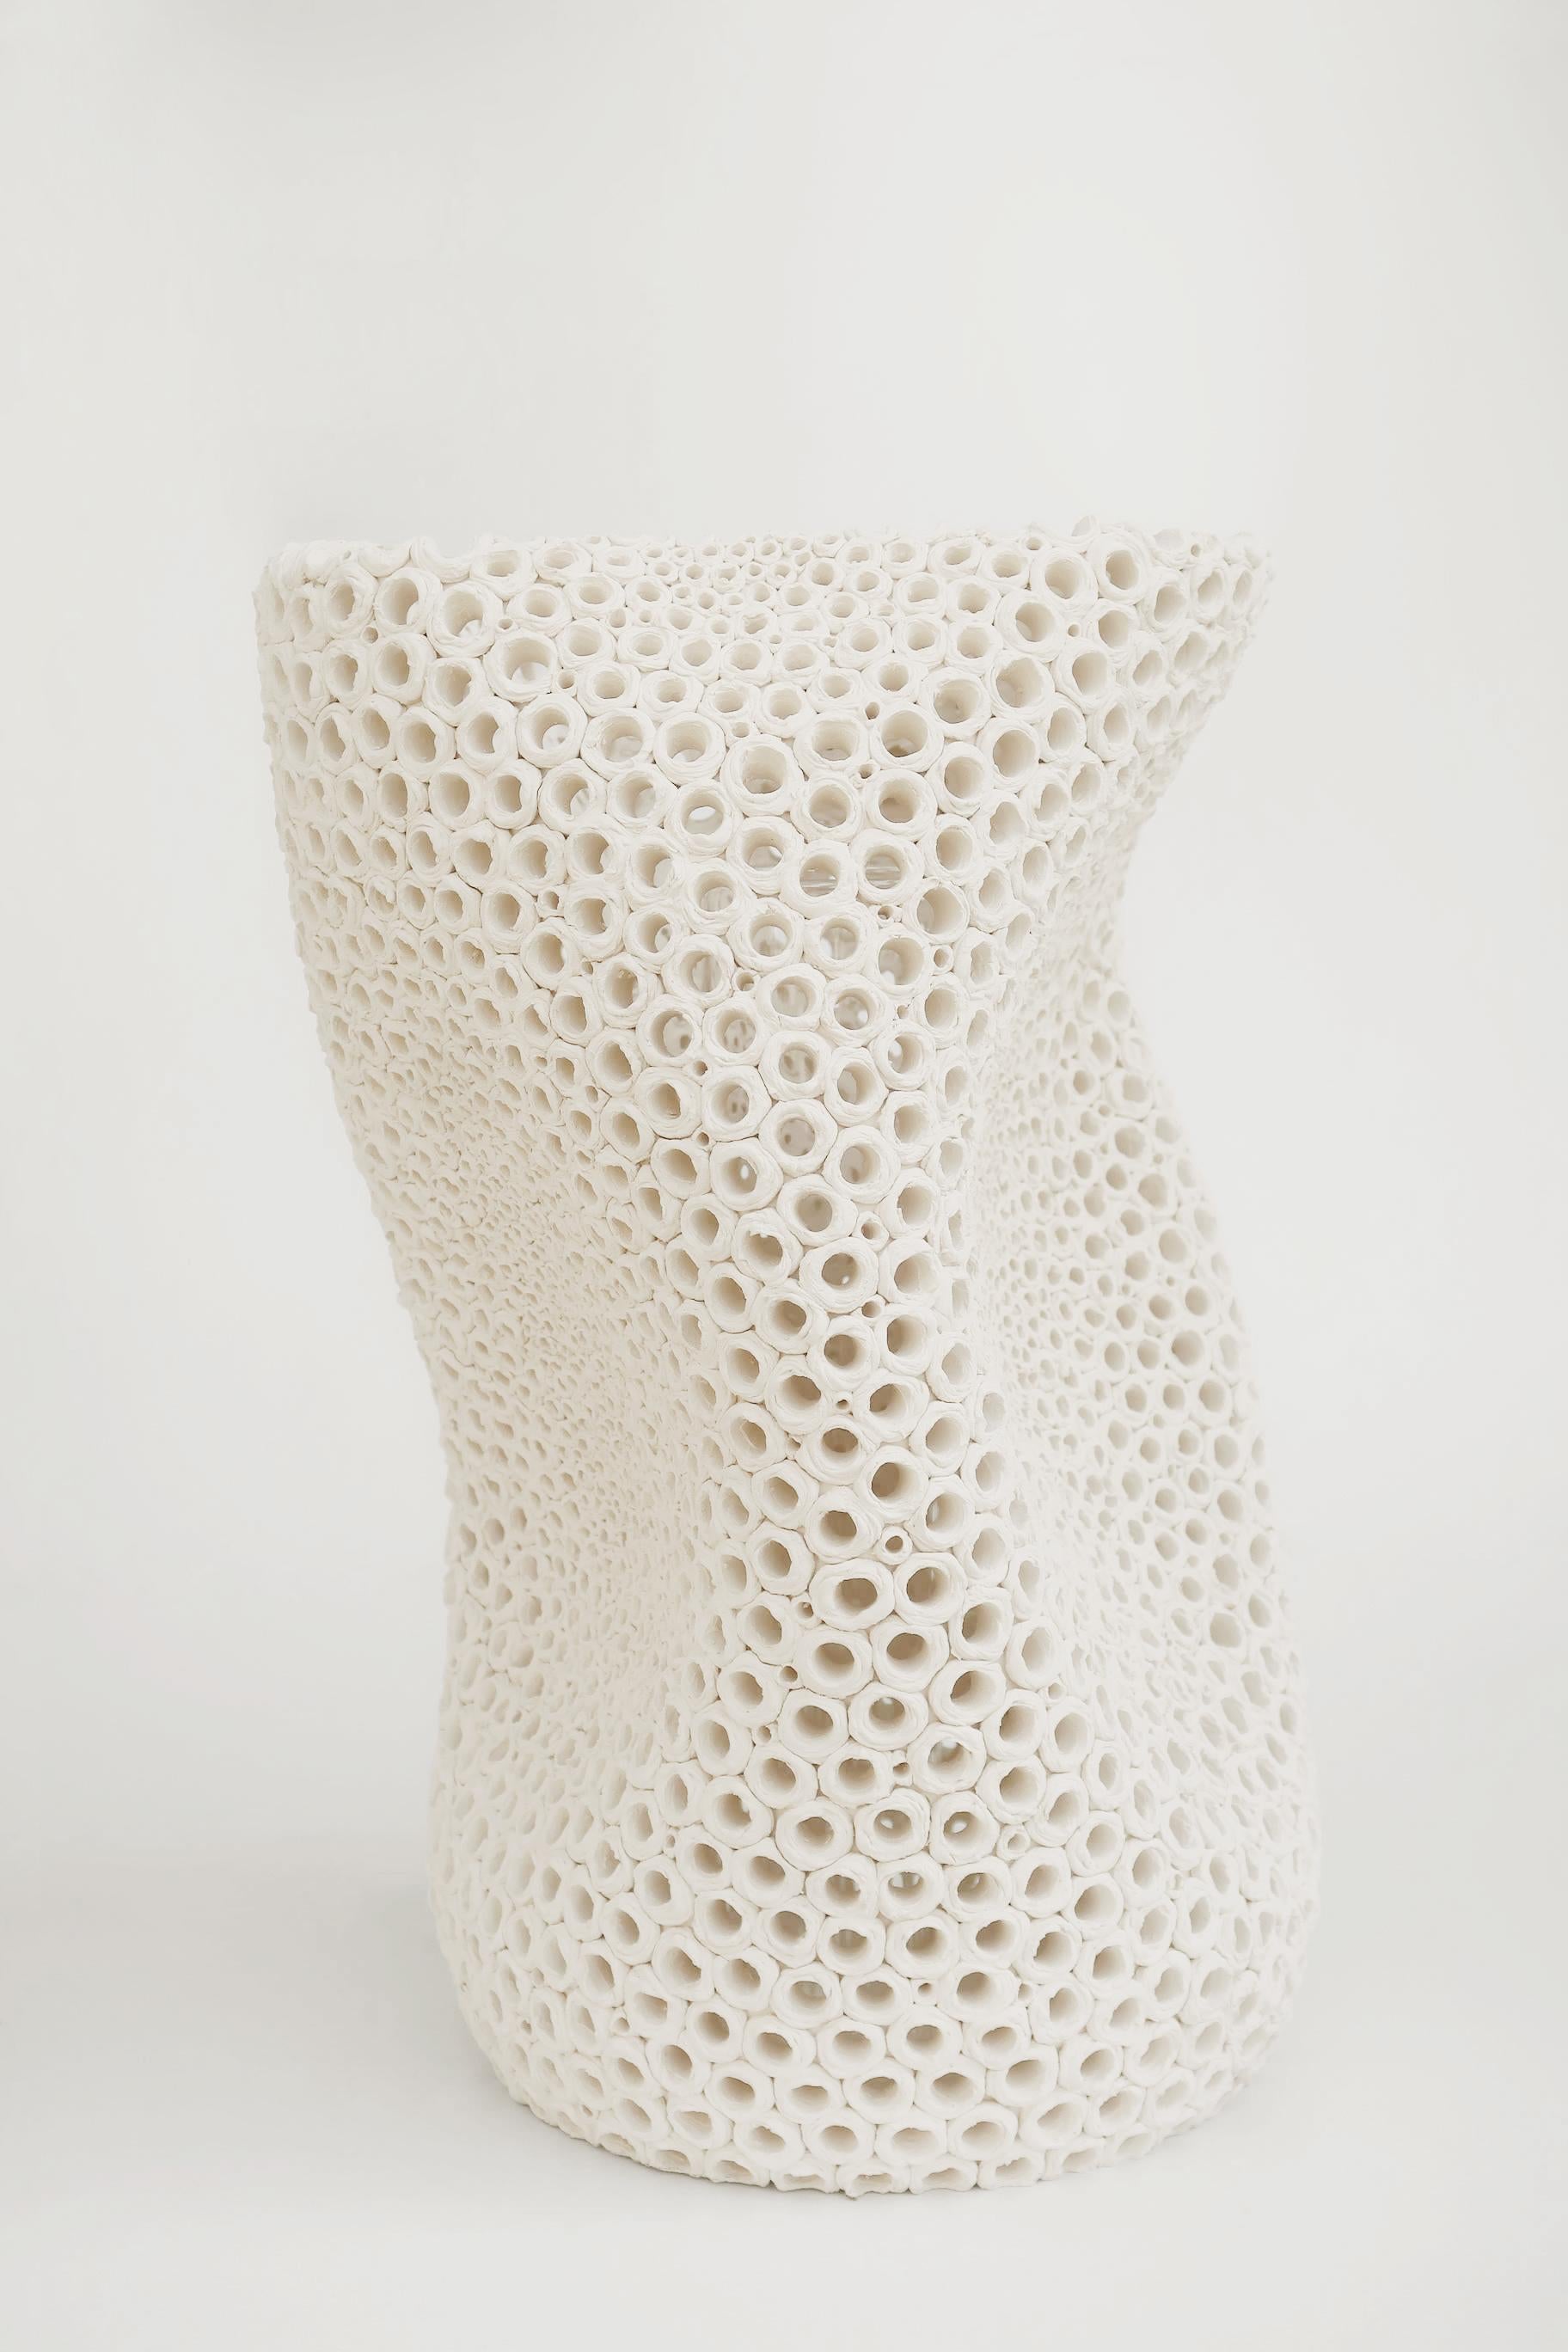 Hand-Crafted Undulating Hand-Pierced Limited Edition Earthenware Vase by Gilles Caffier For Sale